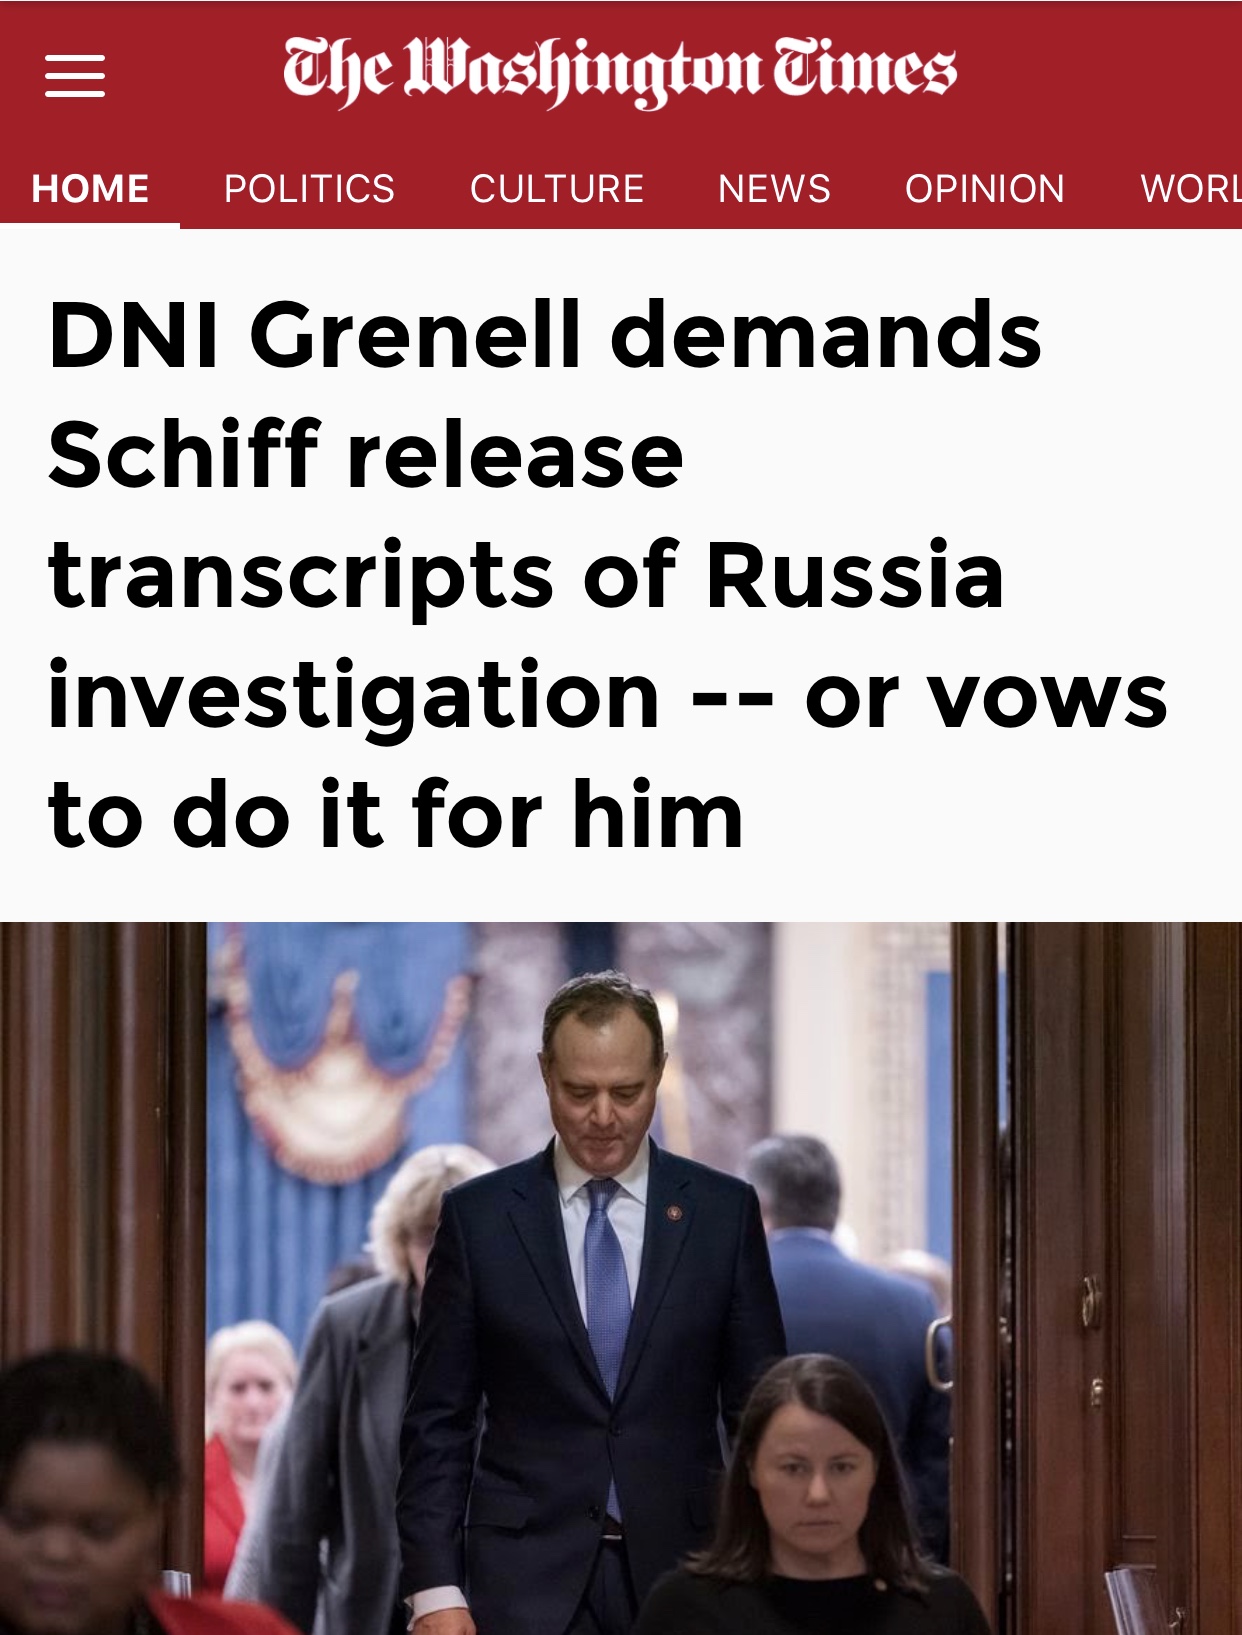 Richard Grenell calls on Adam Schiff to honor his promise to release transcripts of investigations